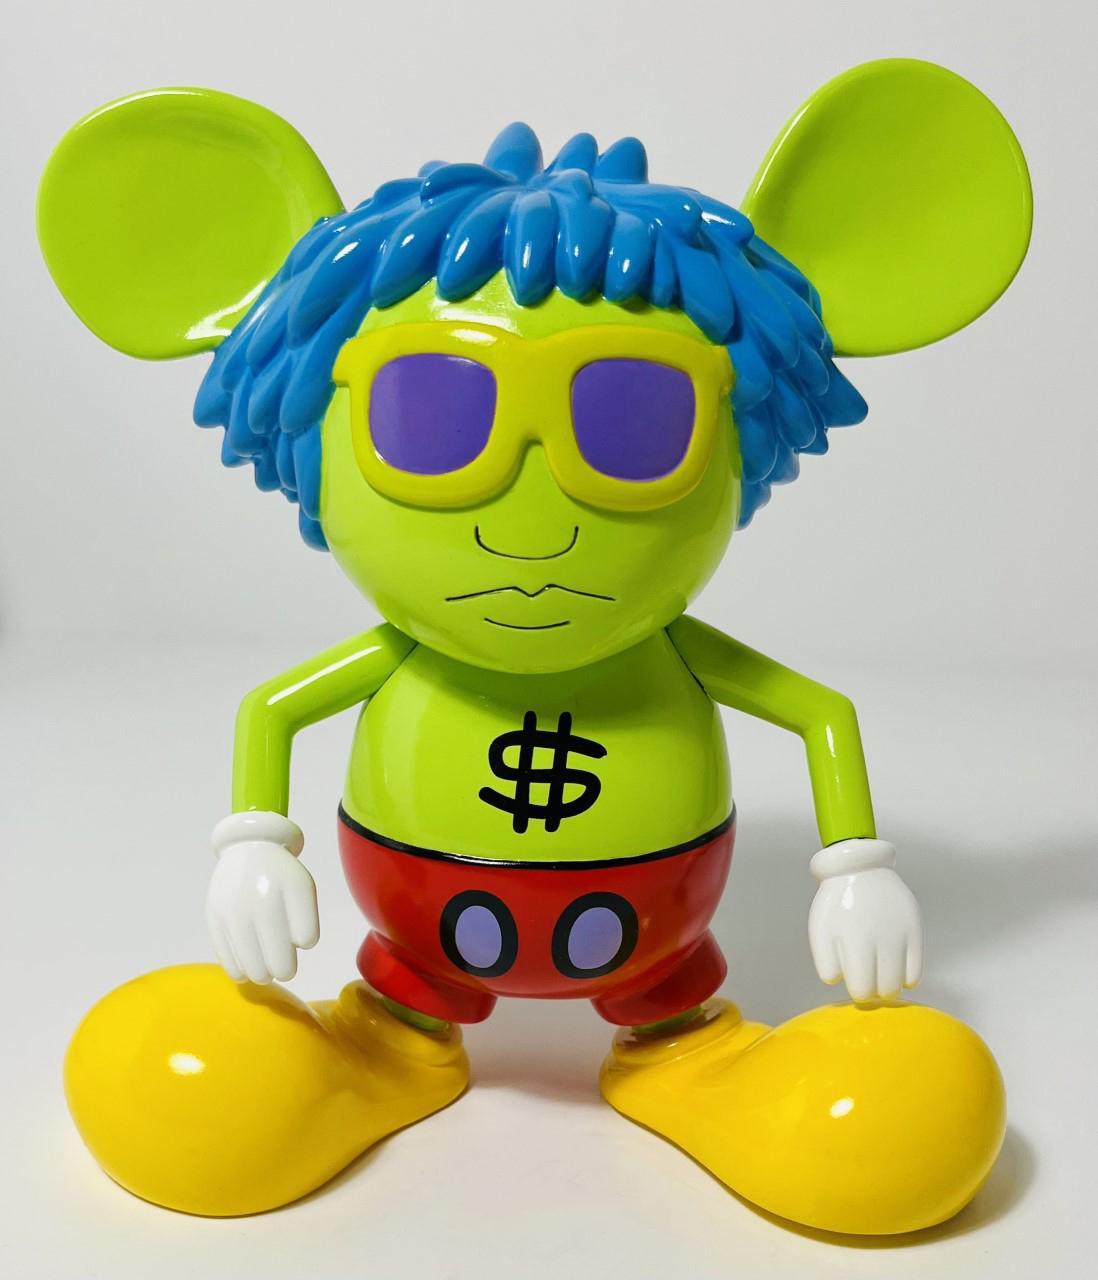 Keith Haring Andy Warhol art toy (Keith Haring Andy Mouse)  - Sculpture by (after) Keith Haring